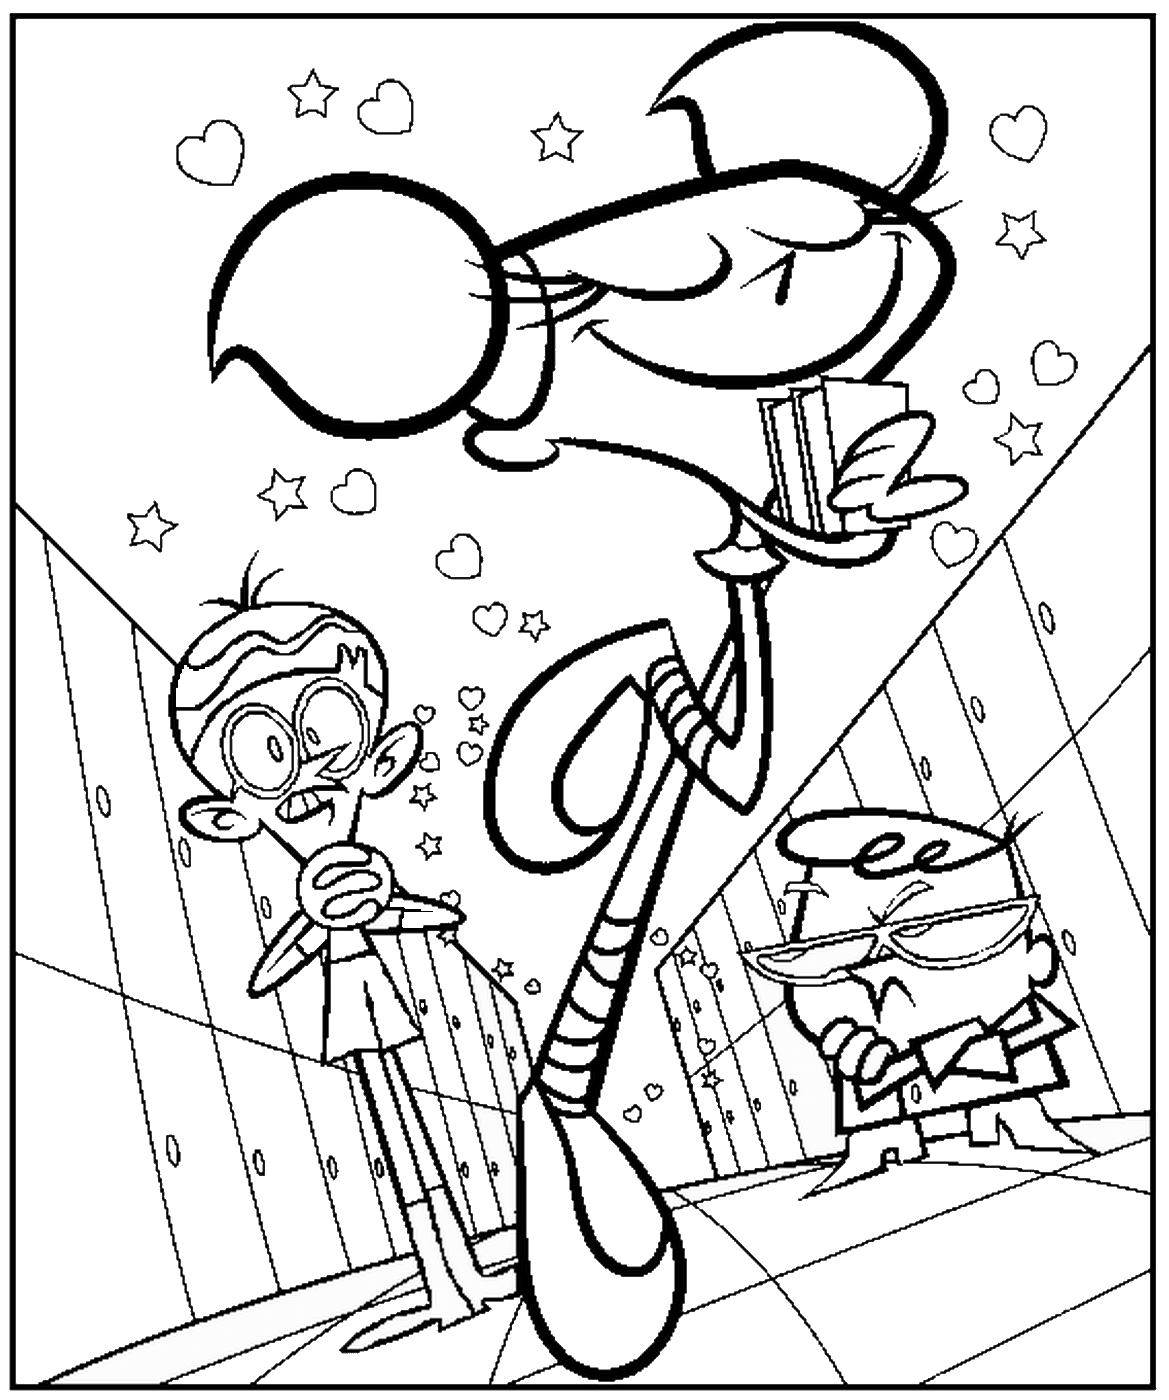 Drawing Dexter Laboratory #50709 (Cartoons) – Printable coloring pages